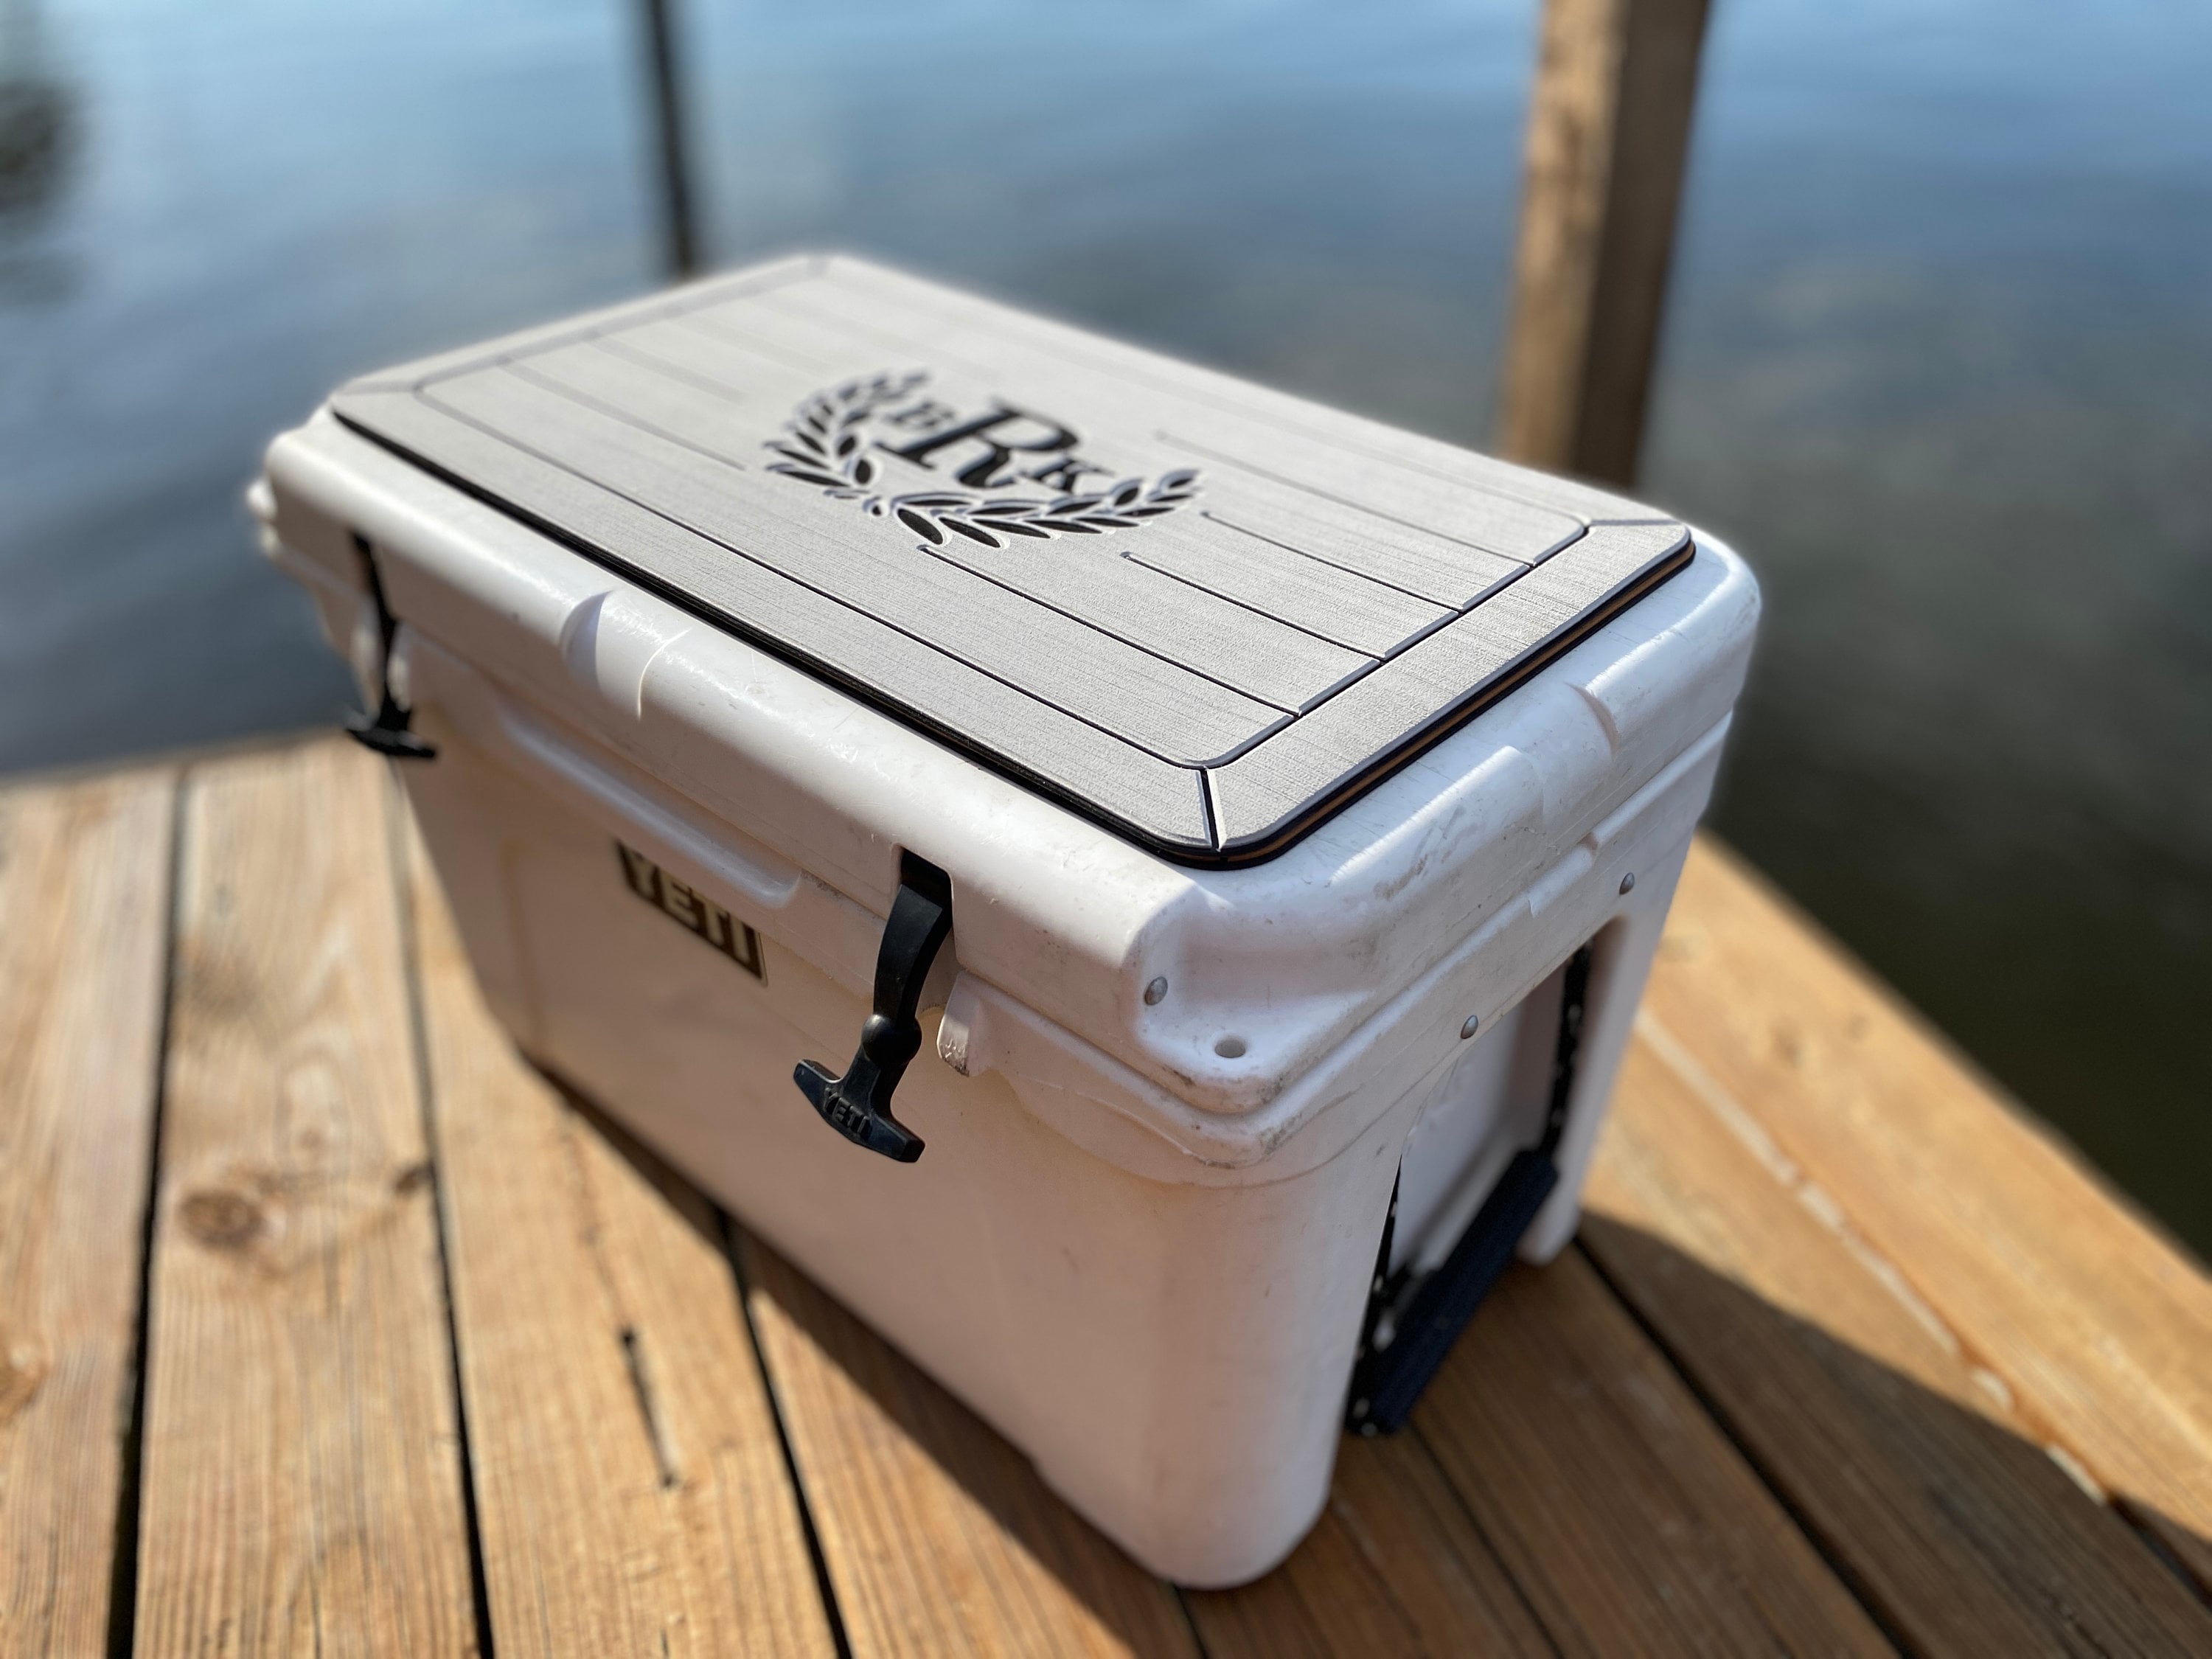 YETI Cooler Covers by PoppTops Custom Covers.